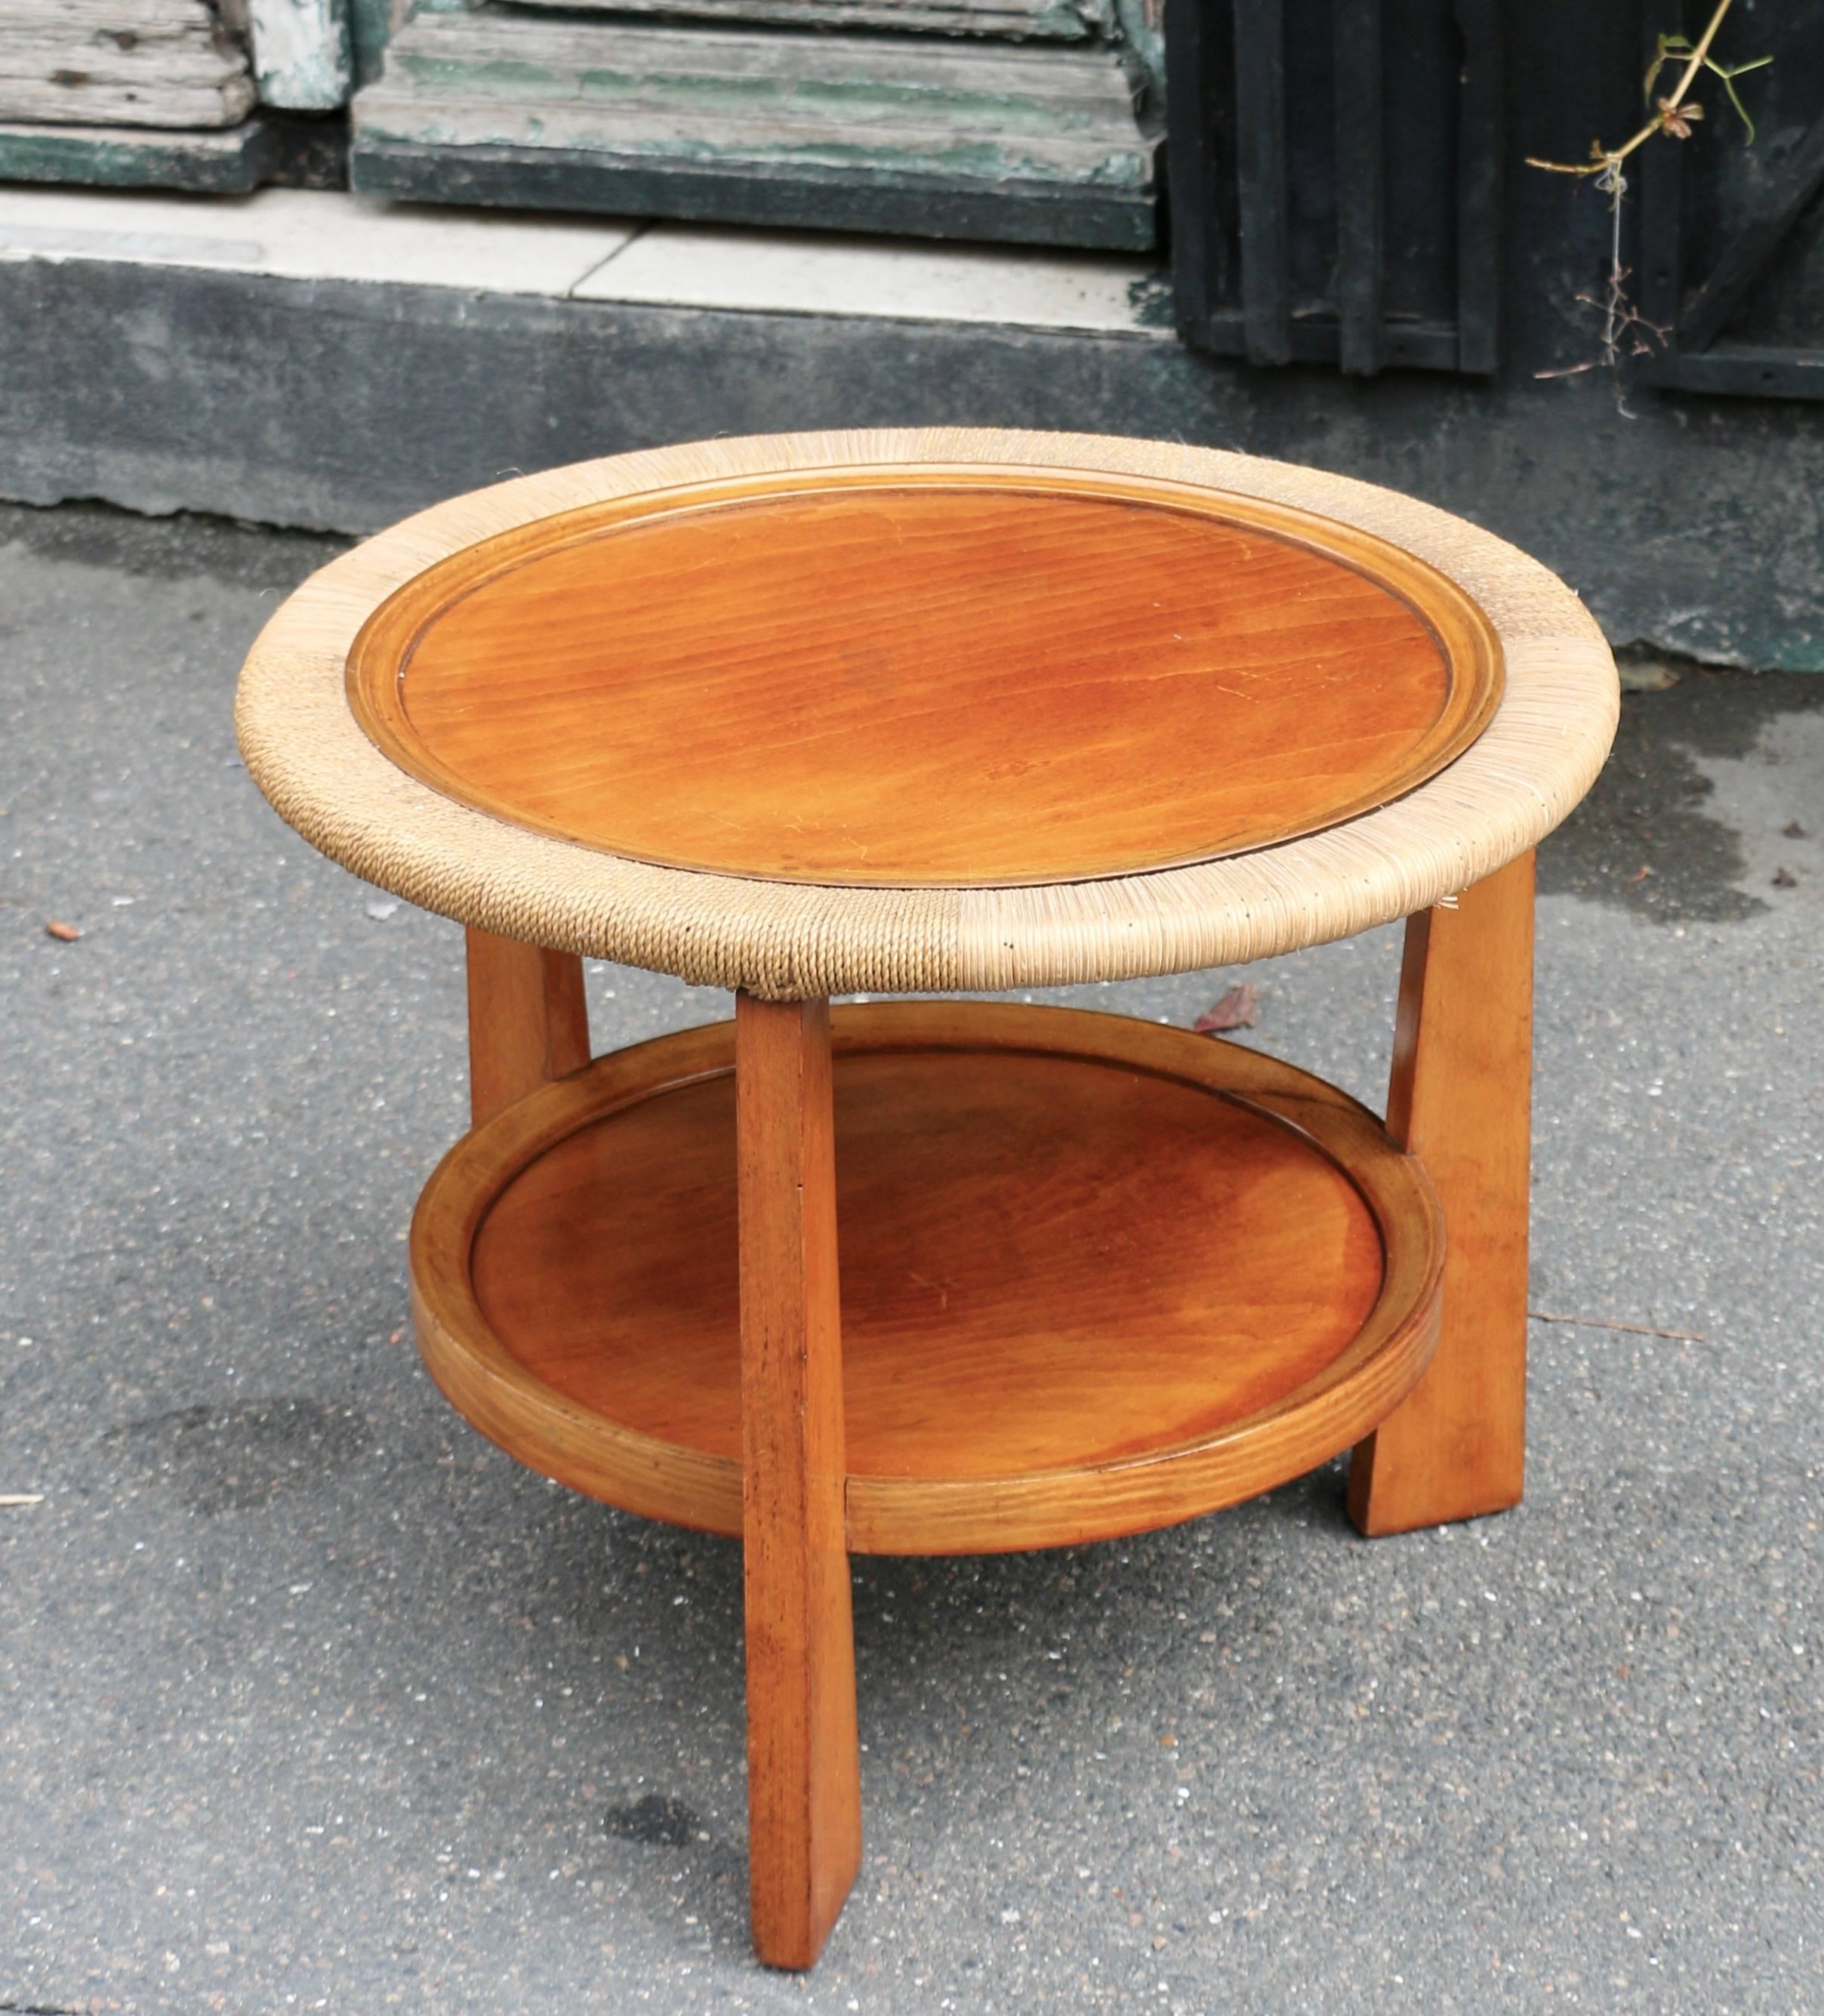 1950s small table with double tray in light wood. The top tray is sheathed with rope.